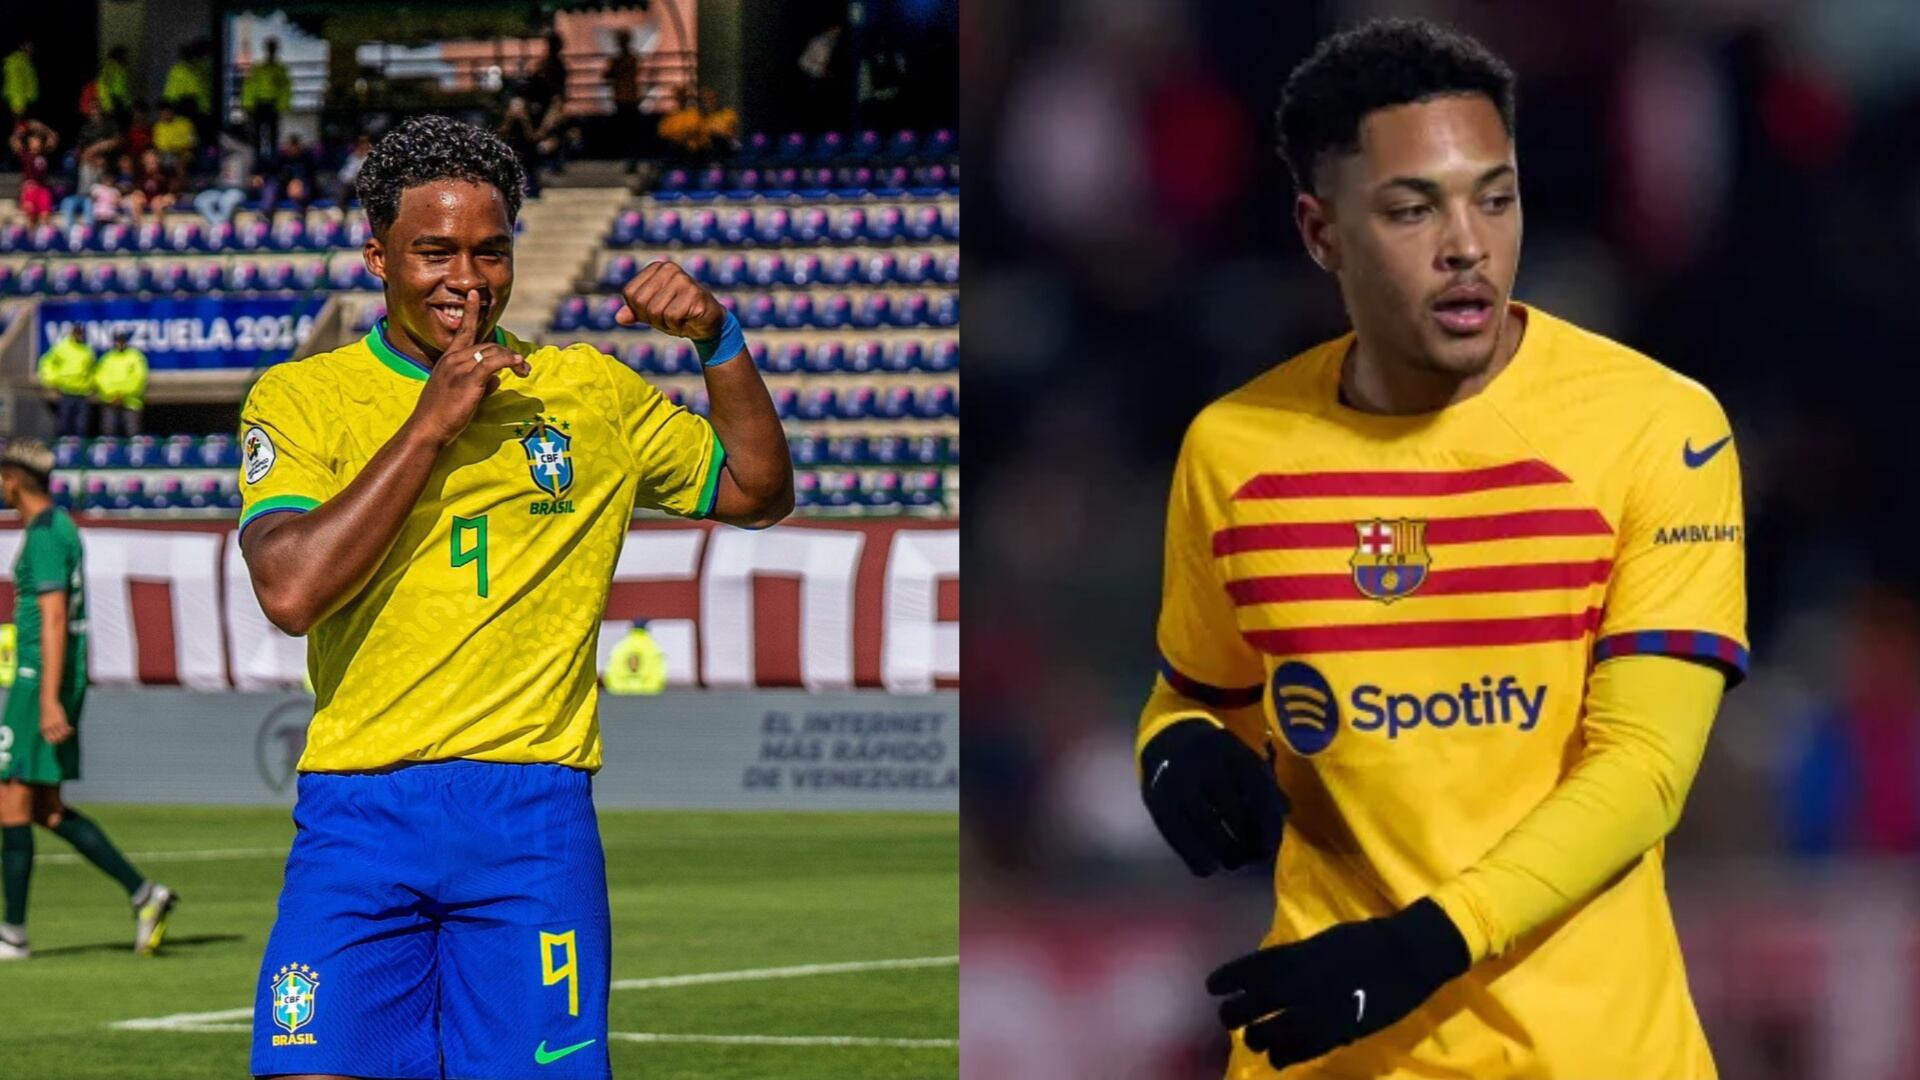 While Roque adjusts to Barca, Madrid's Endrick shines with Brazil’s U23 team